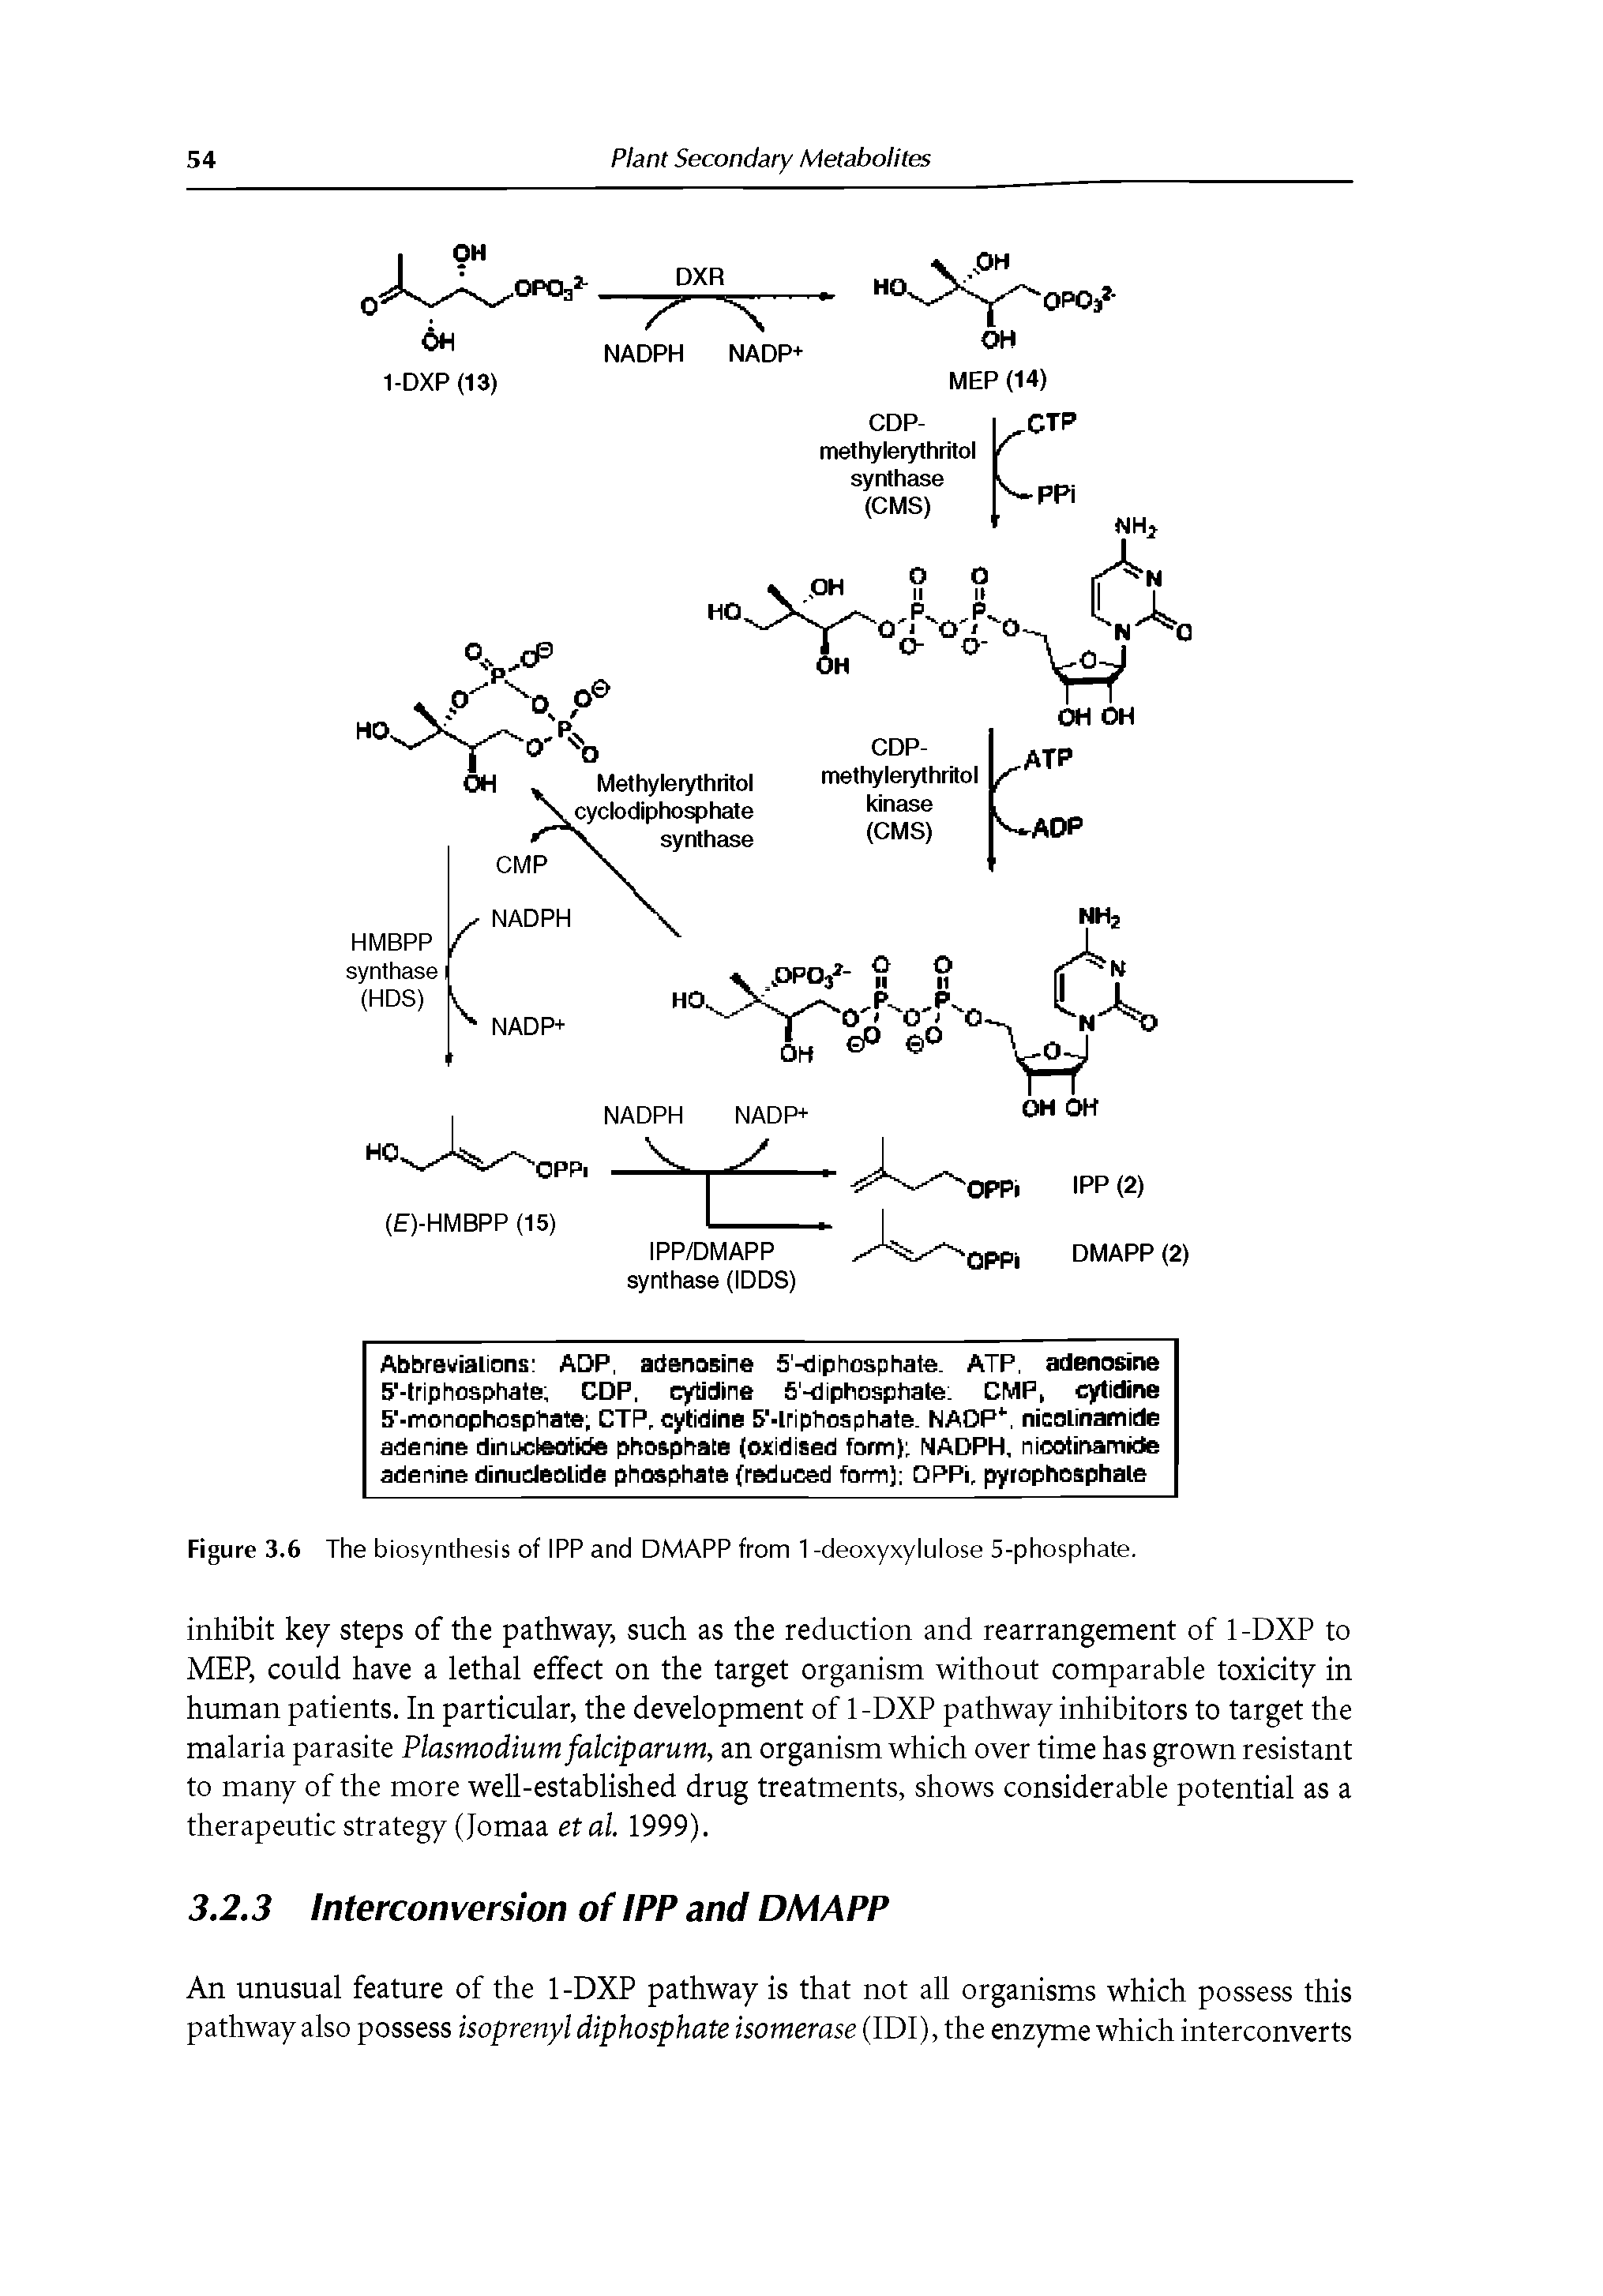 Figure 3.6 The biosynthesis of IPP and DMAPP from 1 -deoxyxylulose 5-phosphate.